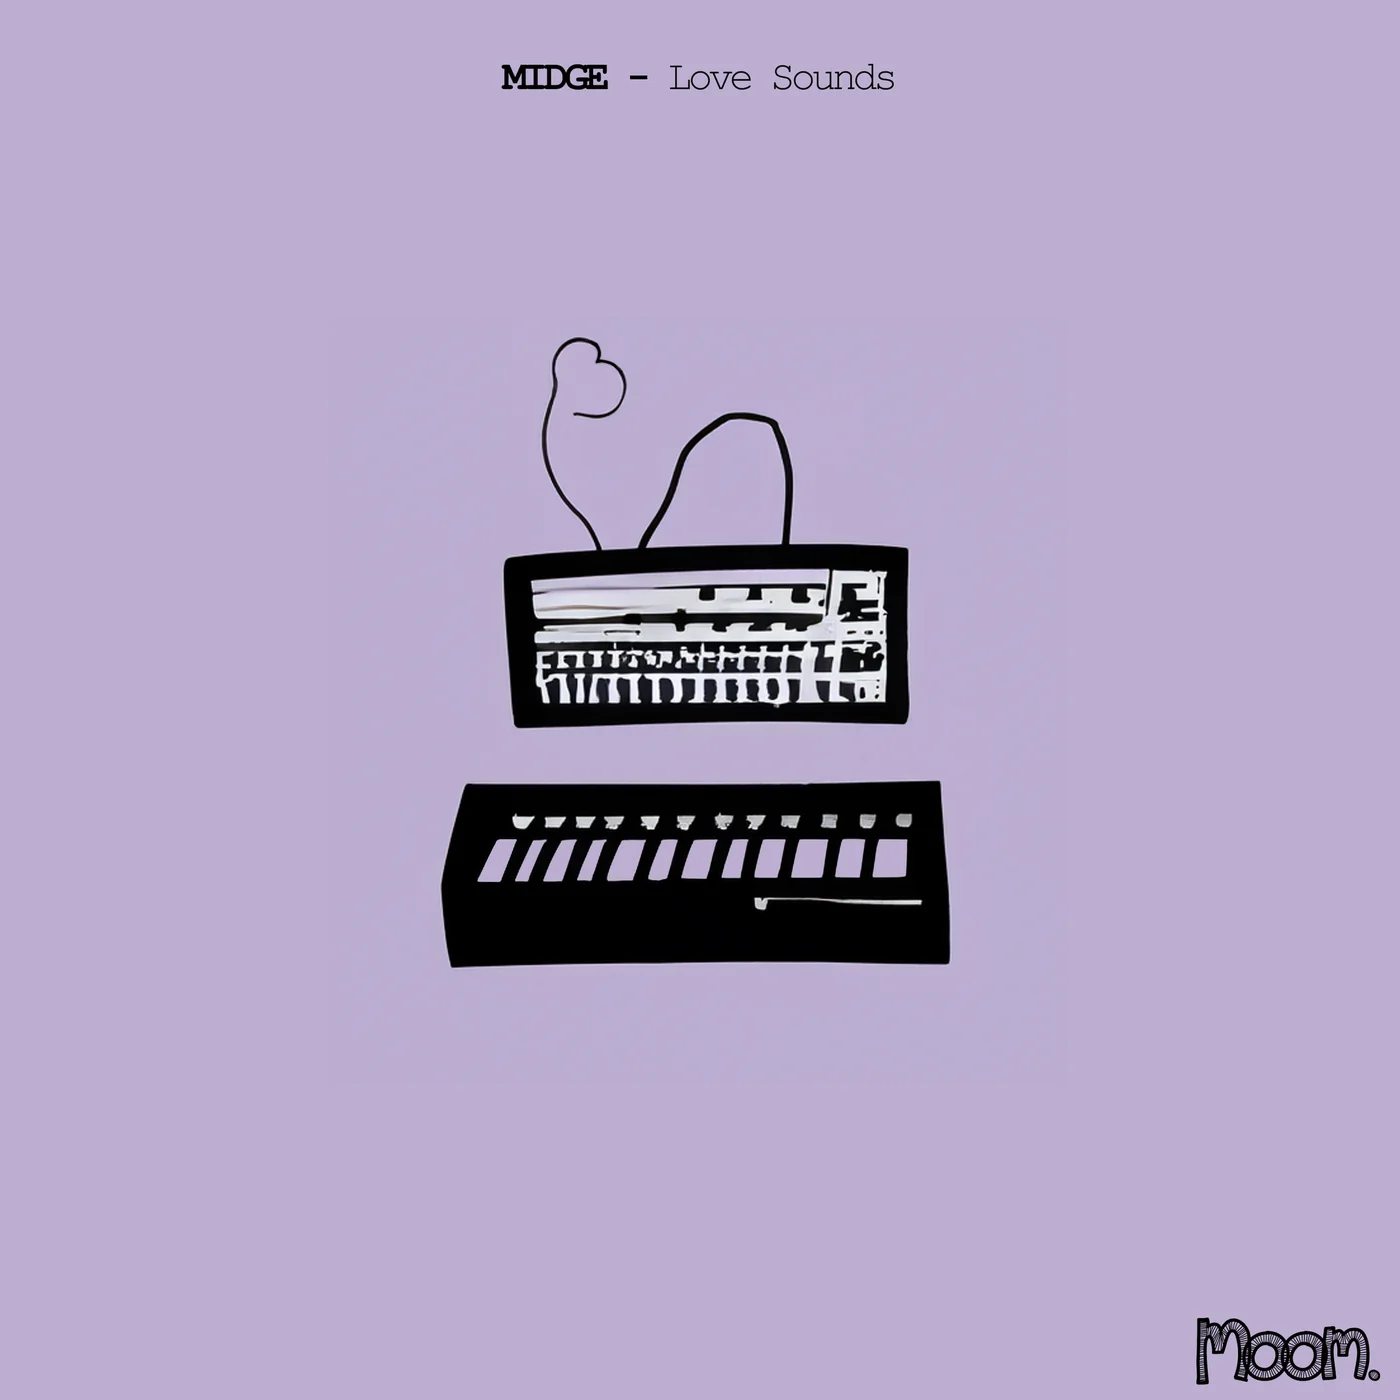 MIDGE brings us his 3rd EP on Moom, “Love Sounds”, three deep house cuts with his signature sound